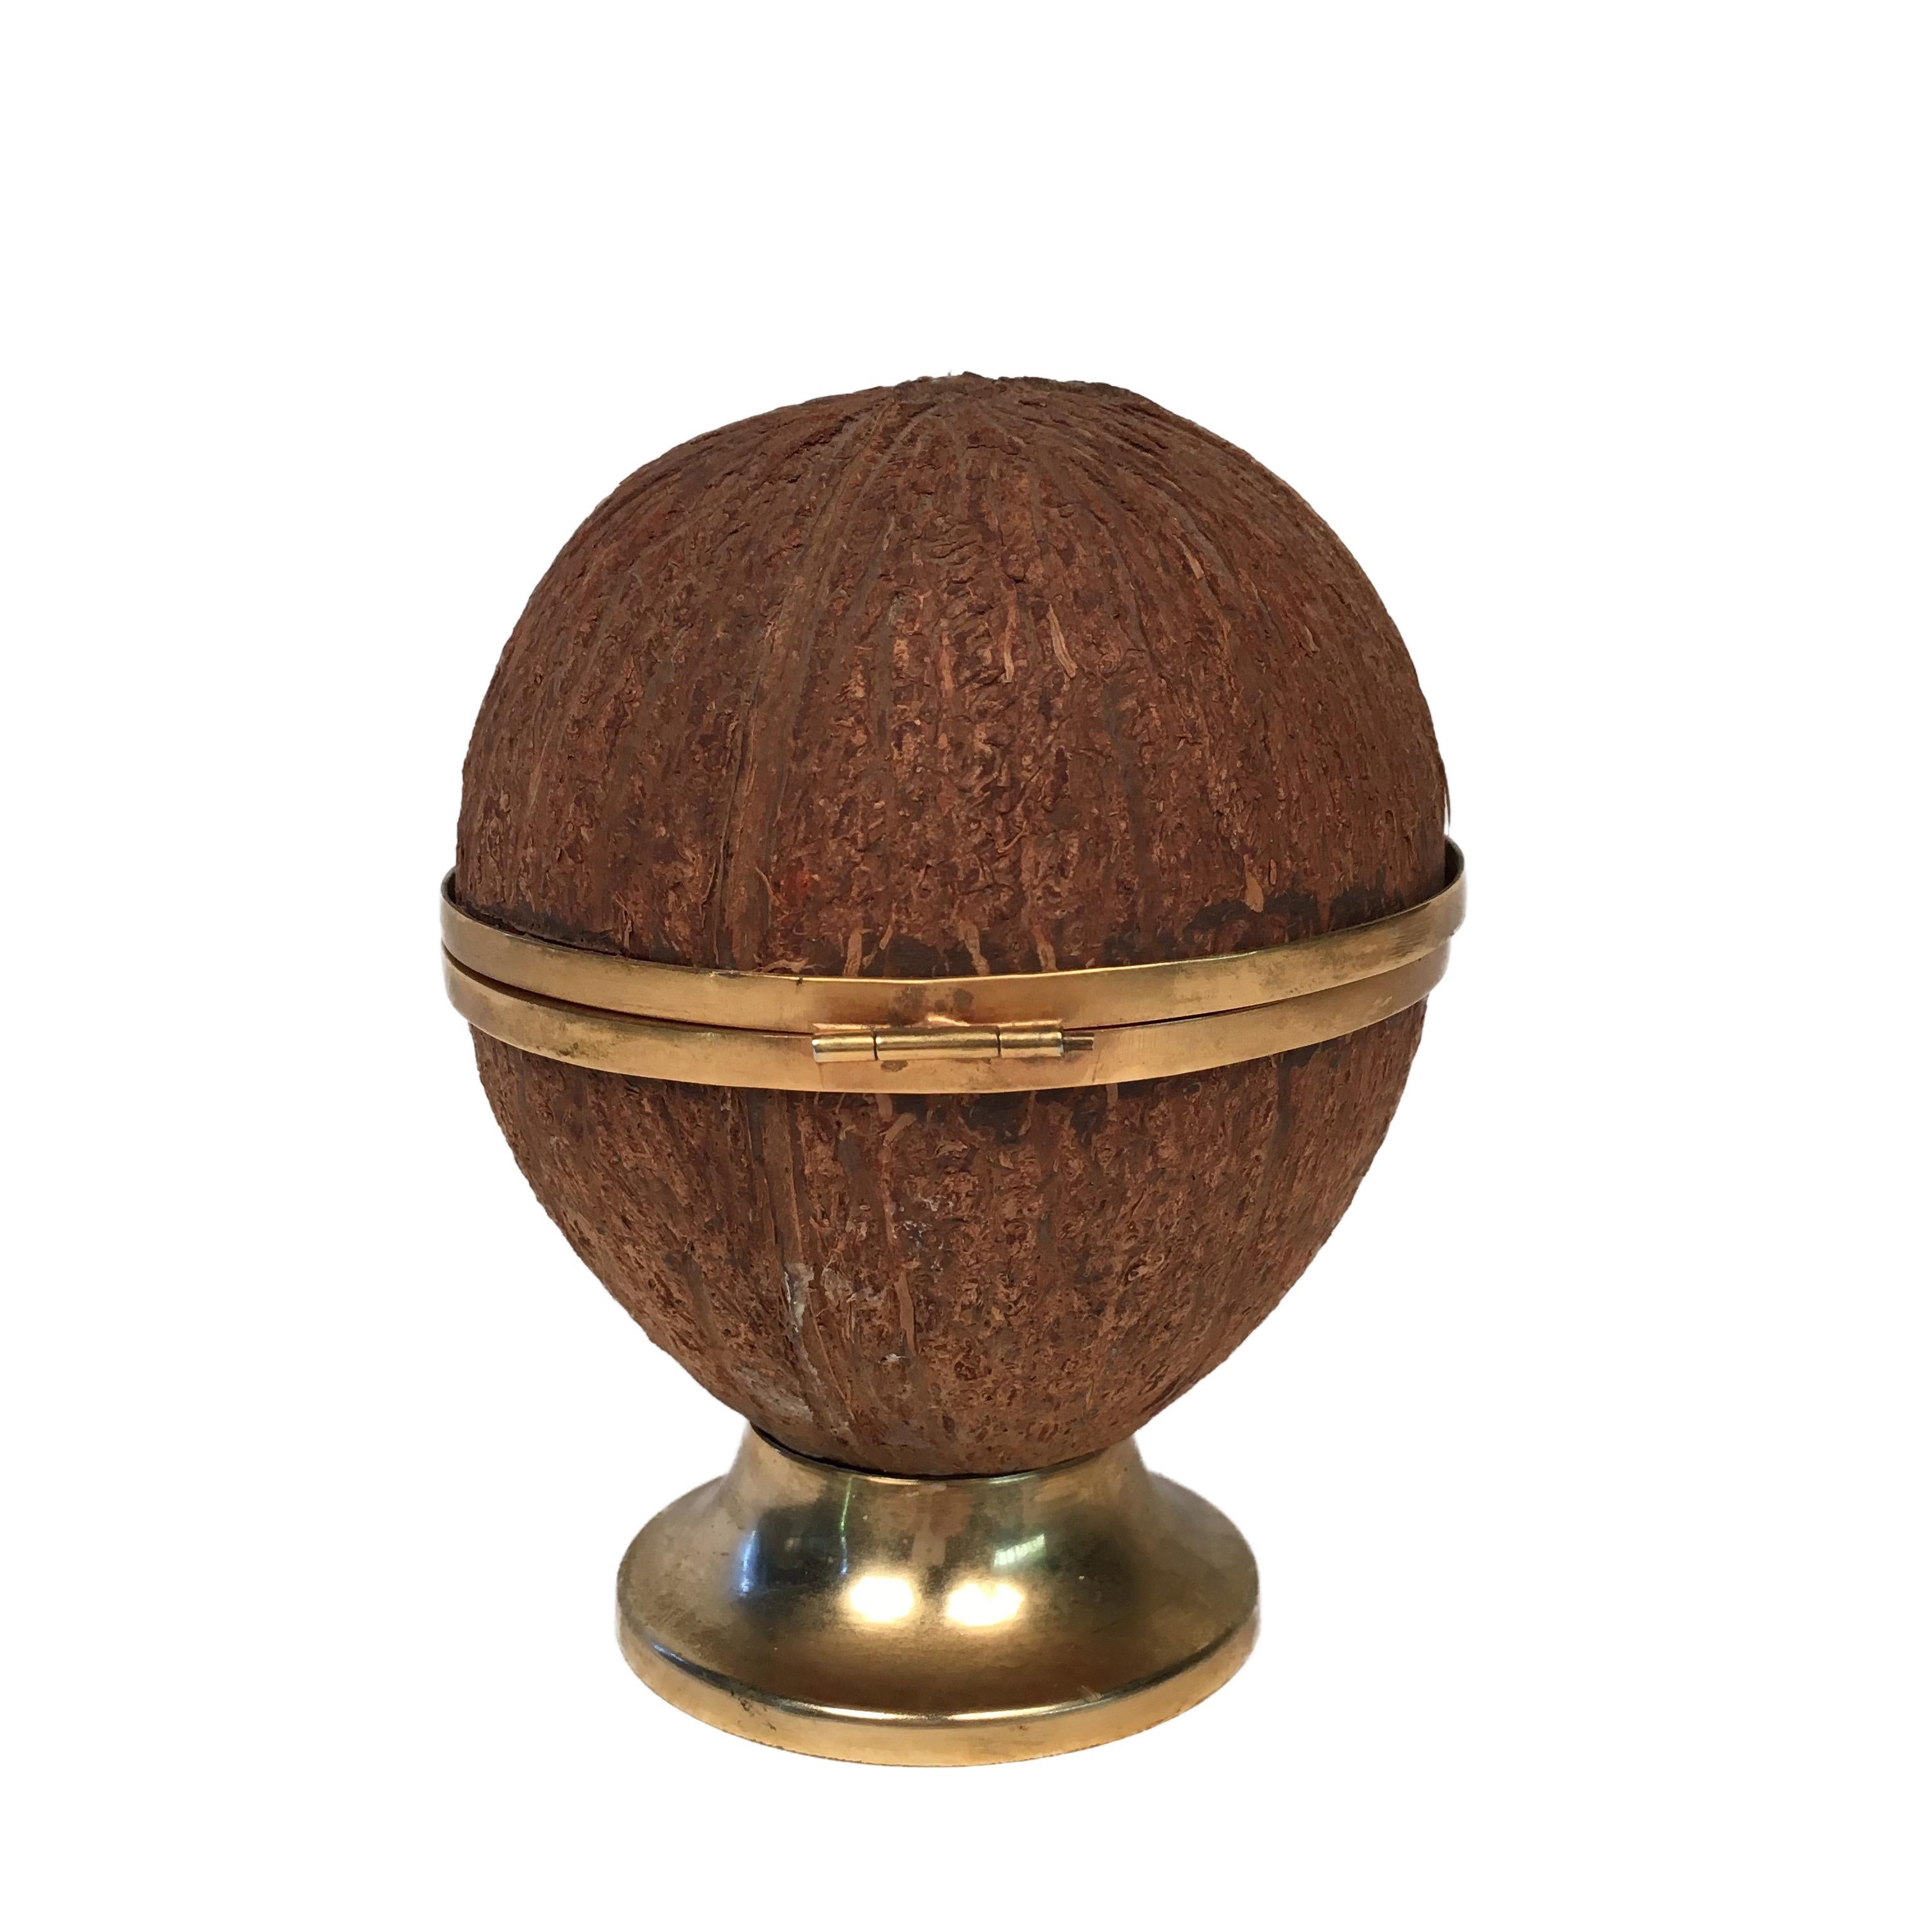 This wonderful ashtray was made from a real coconut and its interior is covered by brass. It rests on a base also in brass.